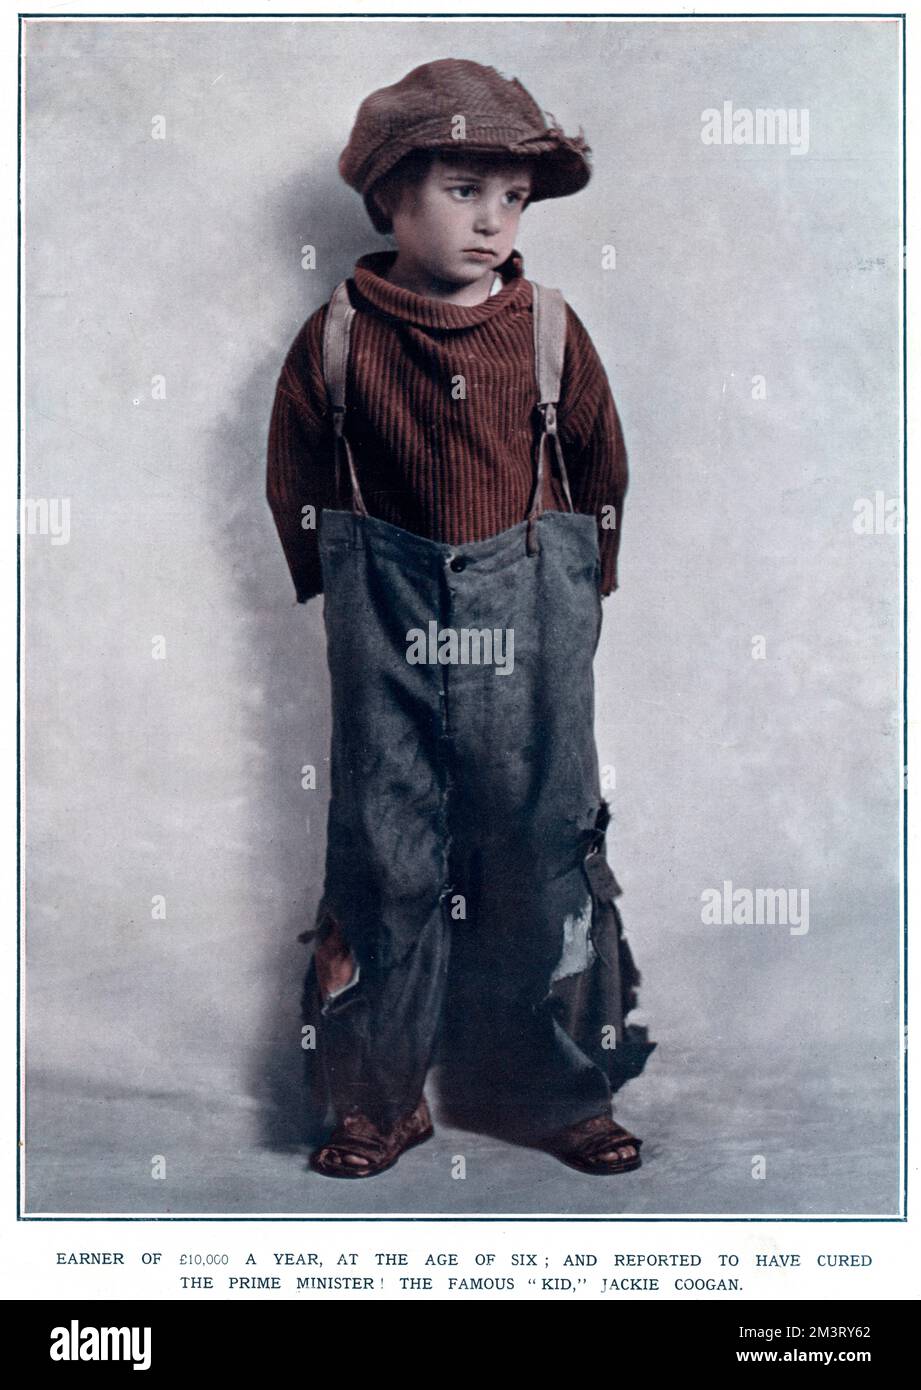 Child actor Jackie Coogan aged six. Coogan began as a child actor in silent films after being discovered by Charlie Chaplin and at this point earned 10,000 a year. The Sketch describes his ambitions to have Mary Pickford as his leading lady and to retire at the age of fifteen.      Date: 1921 Stock Photo